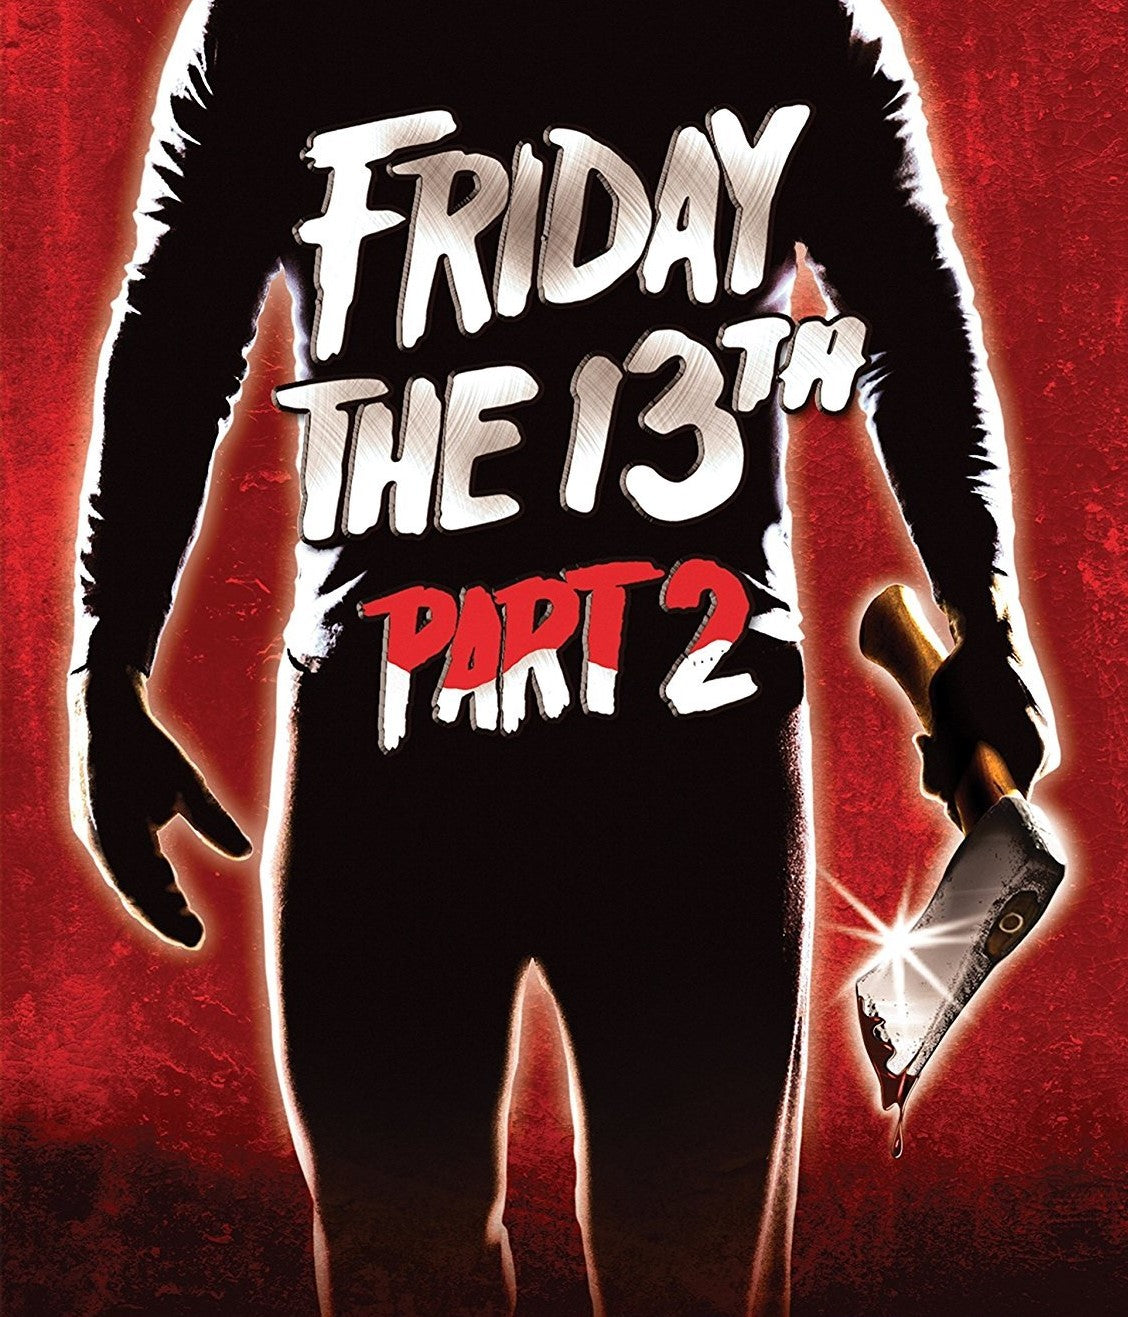 FRIDAY THE 13TH PART 2 BLU-RAY